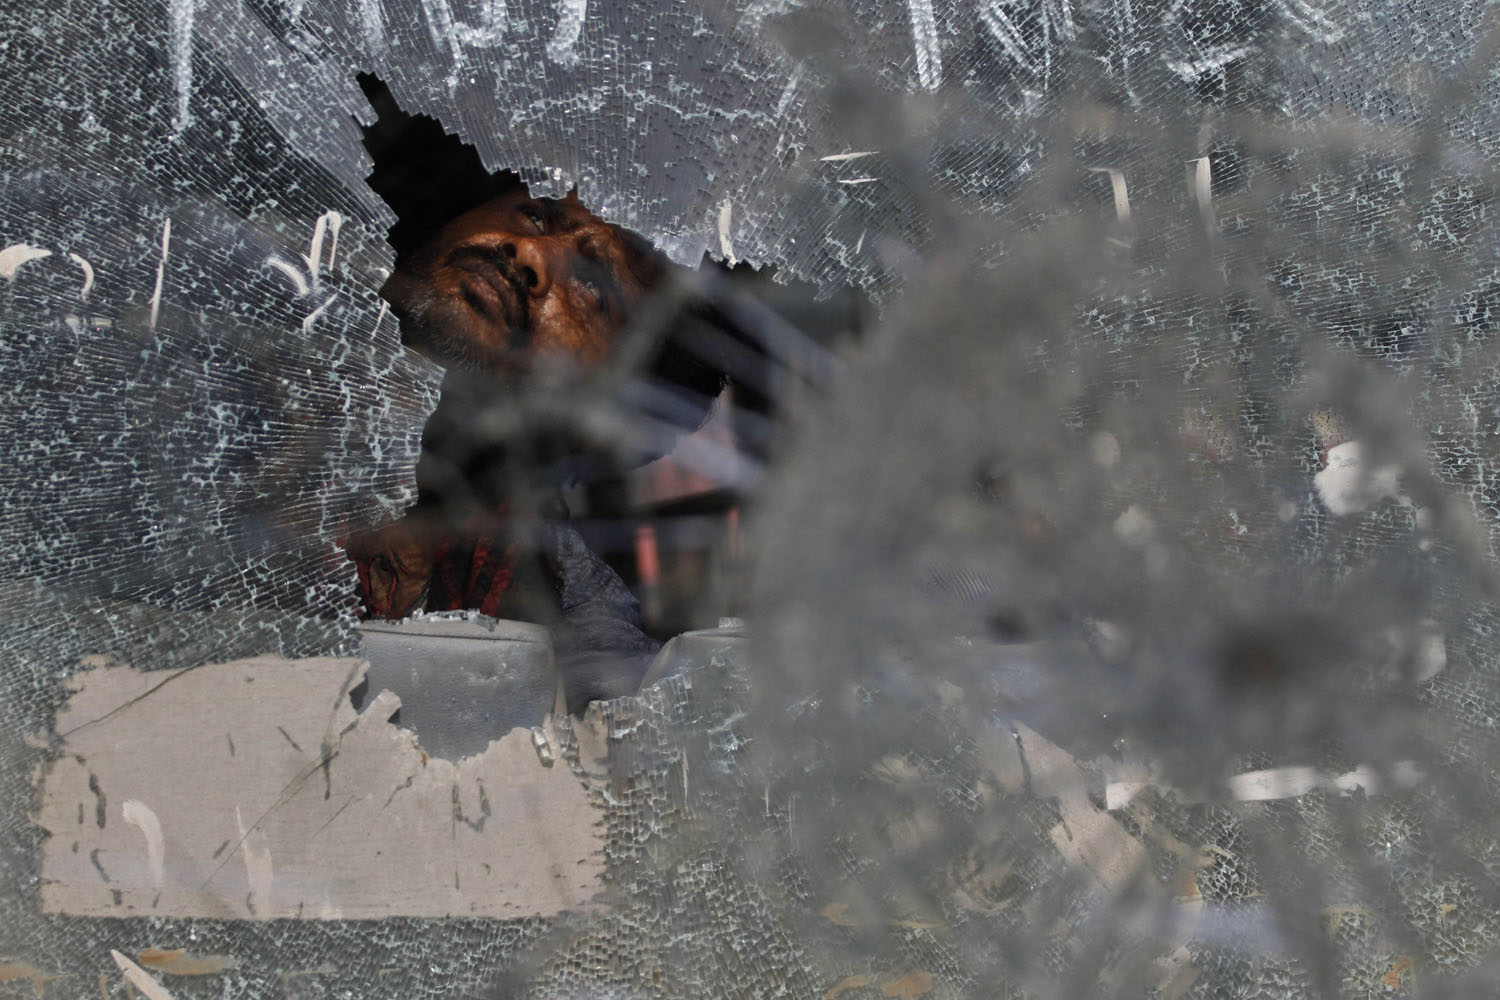 July 15, 2013. A driver inspects one of the government buses damaged by students protesting against caste-based affirmative action in recruitment examinations for government jobs in Allahabad, India.